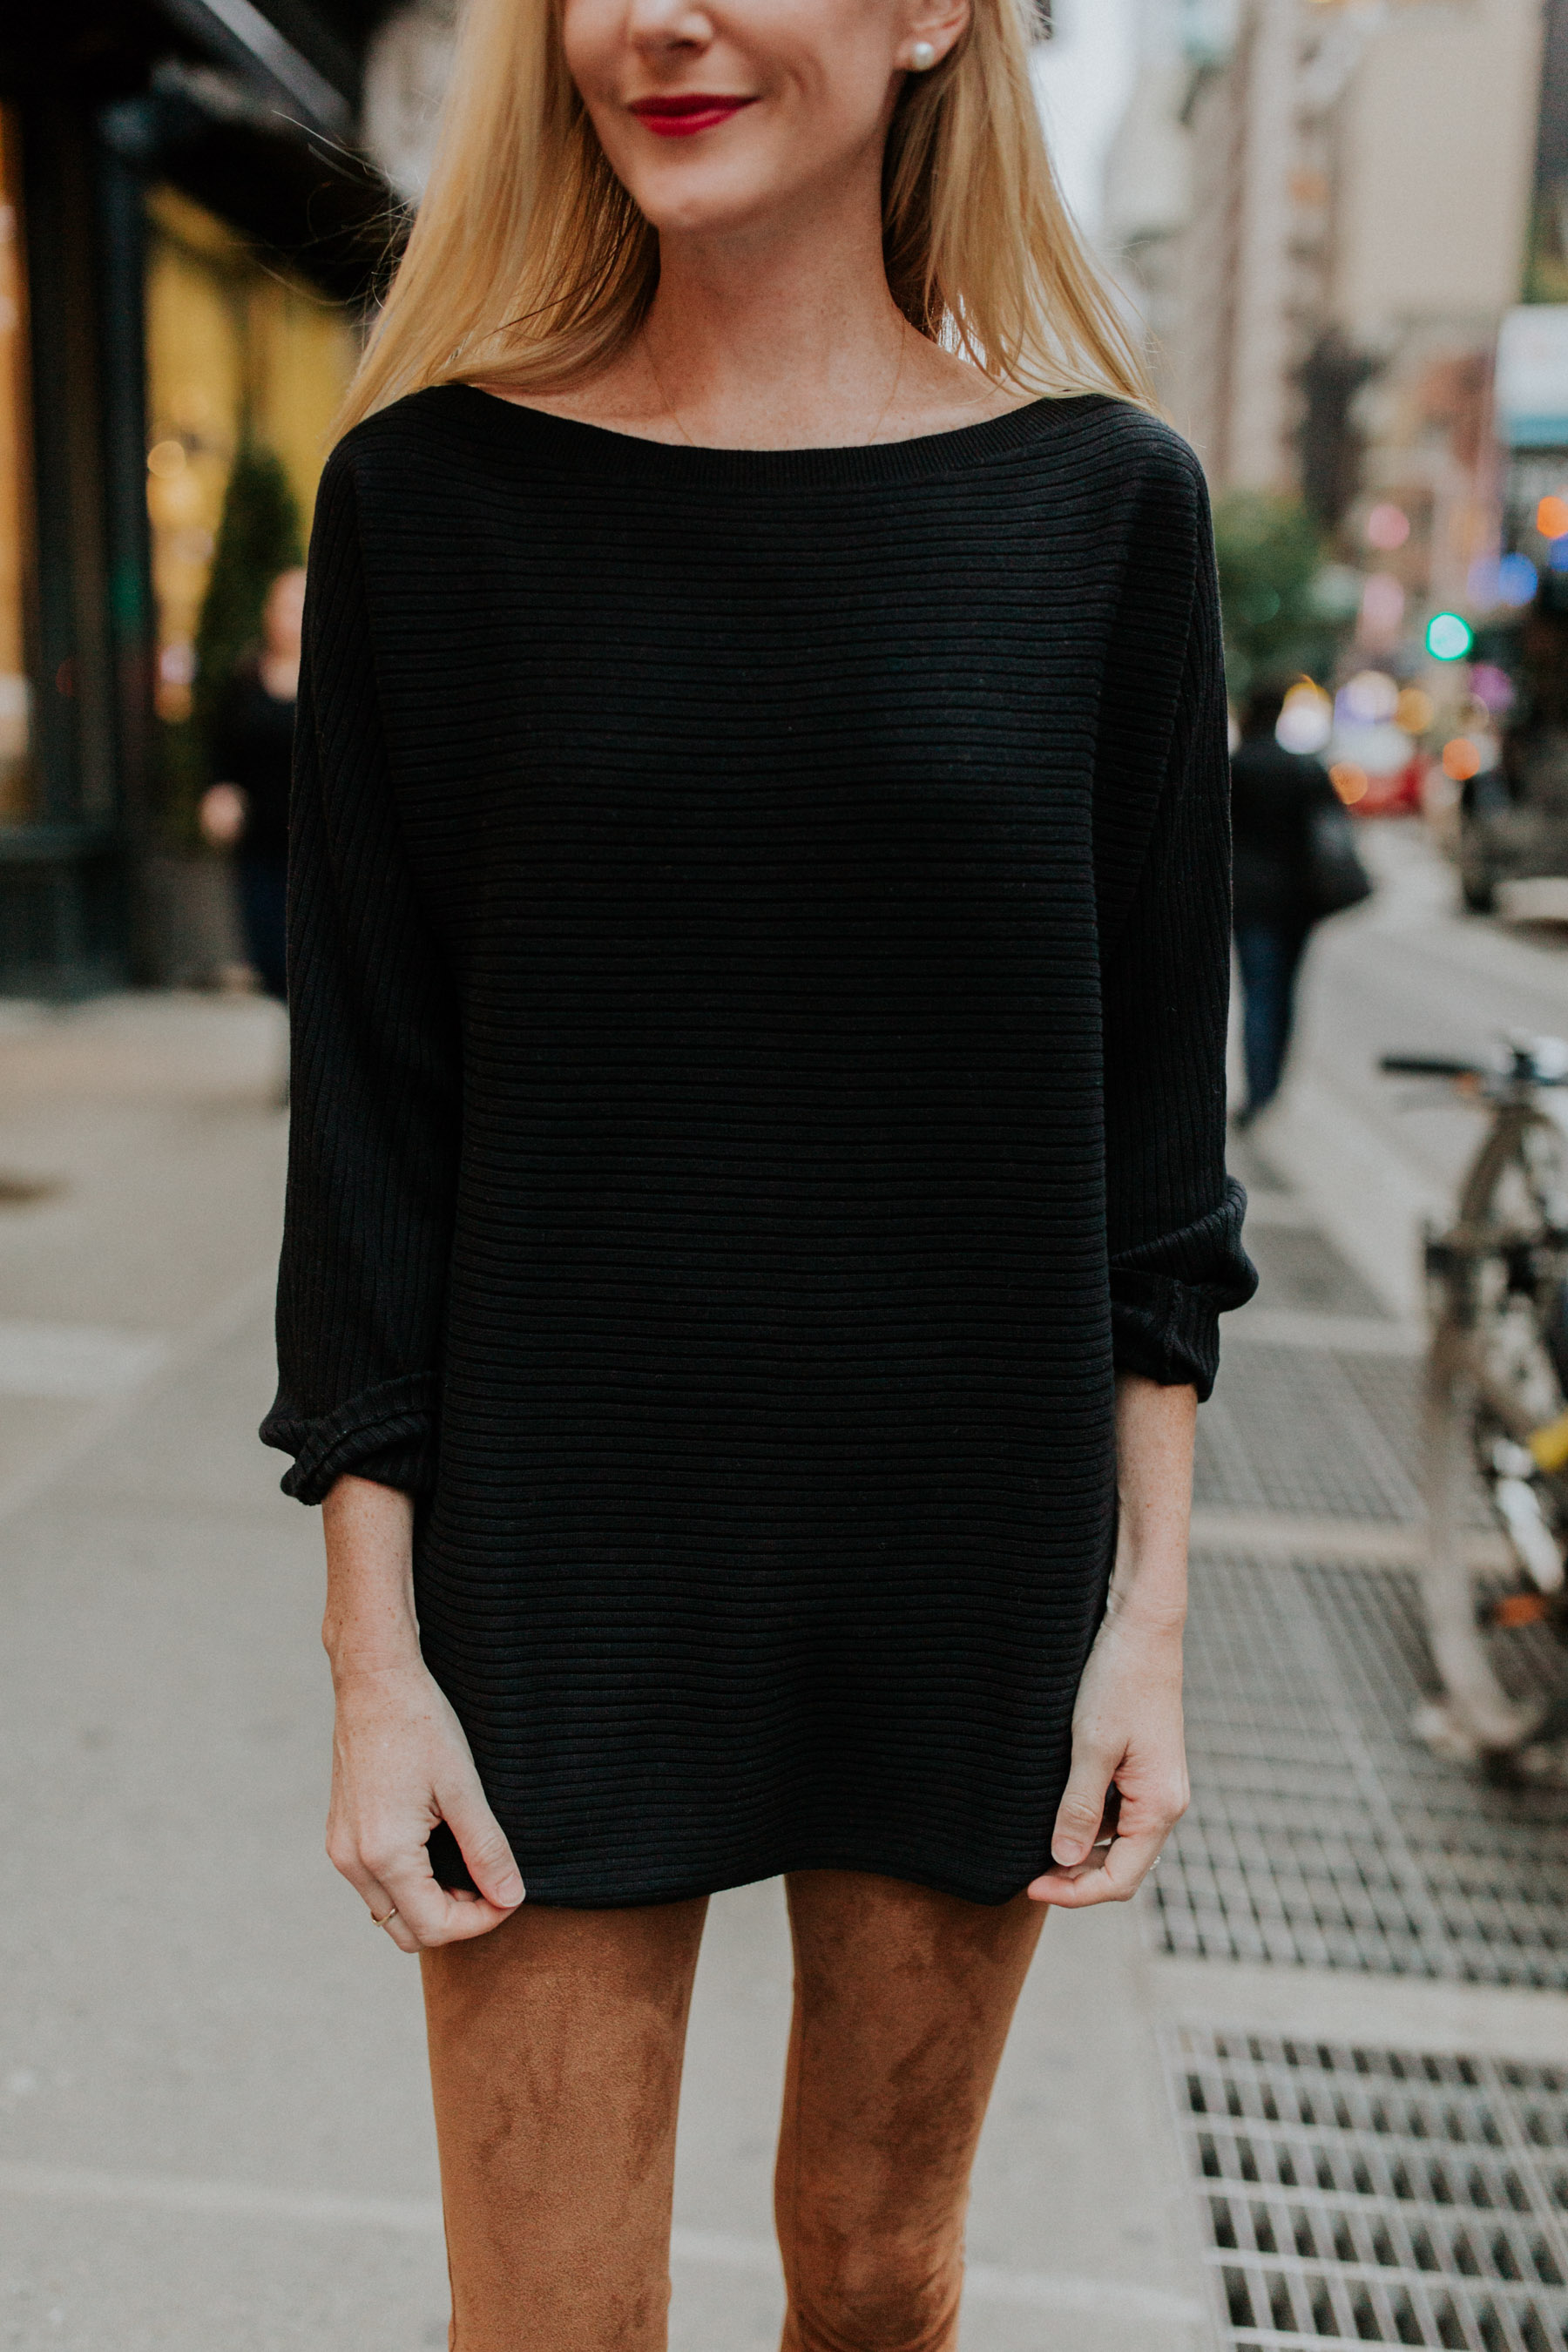 Hello from New York Outfit - Black long sleeve sweater